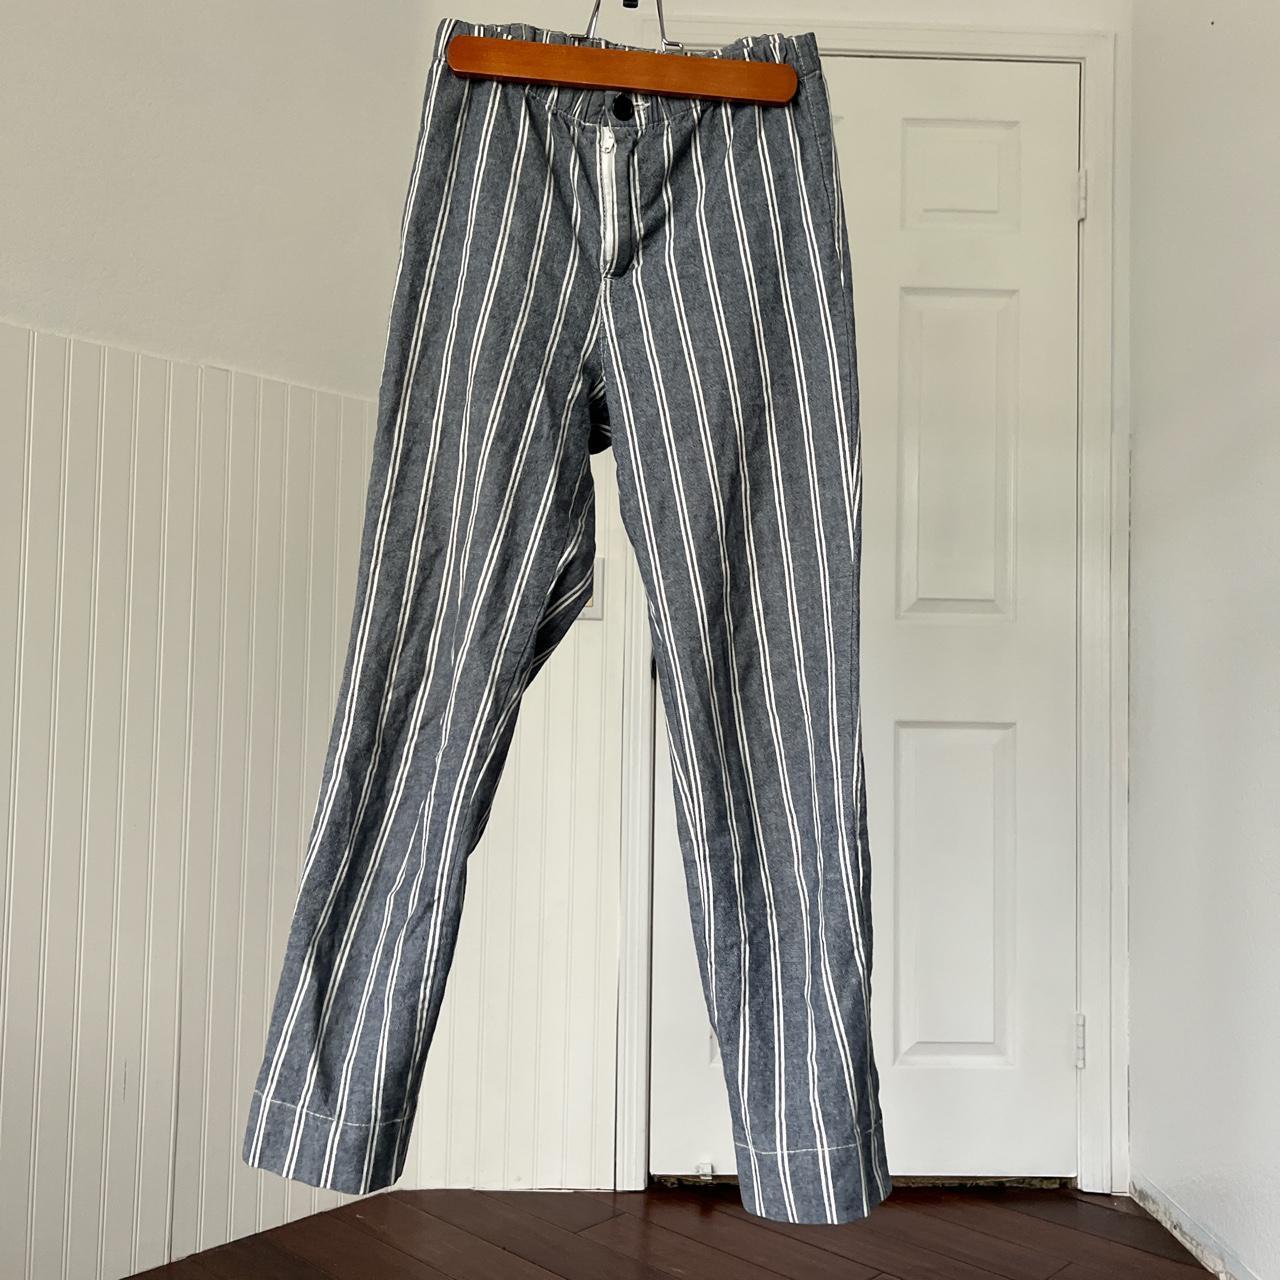 Brandy Melville Women's White and Blue Trousers | Depop